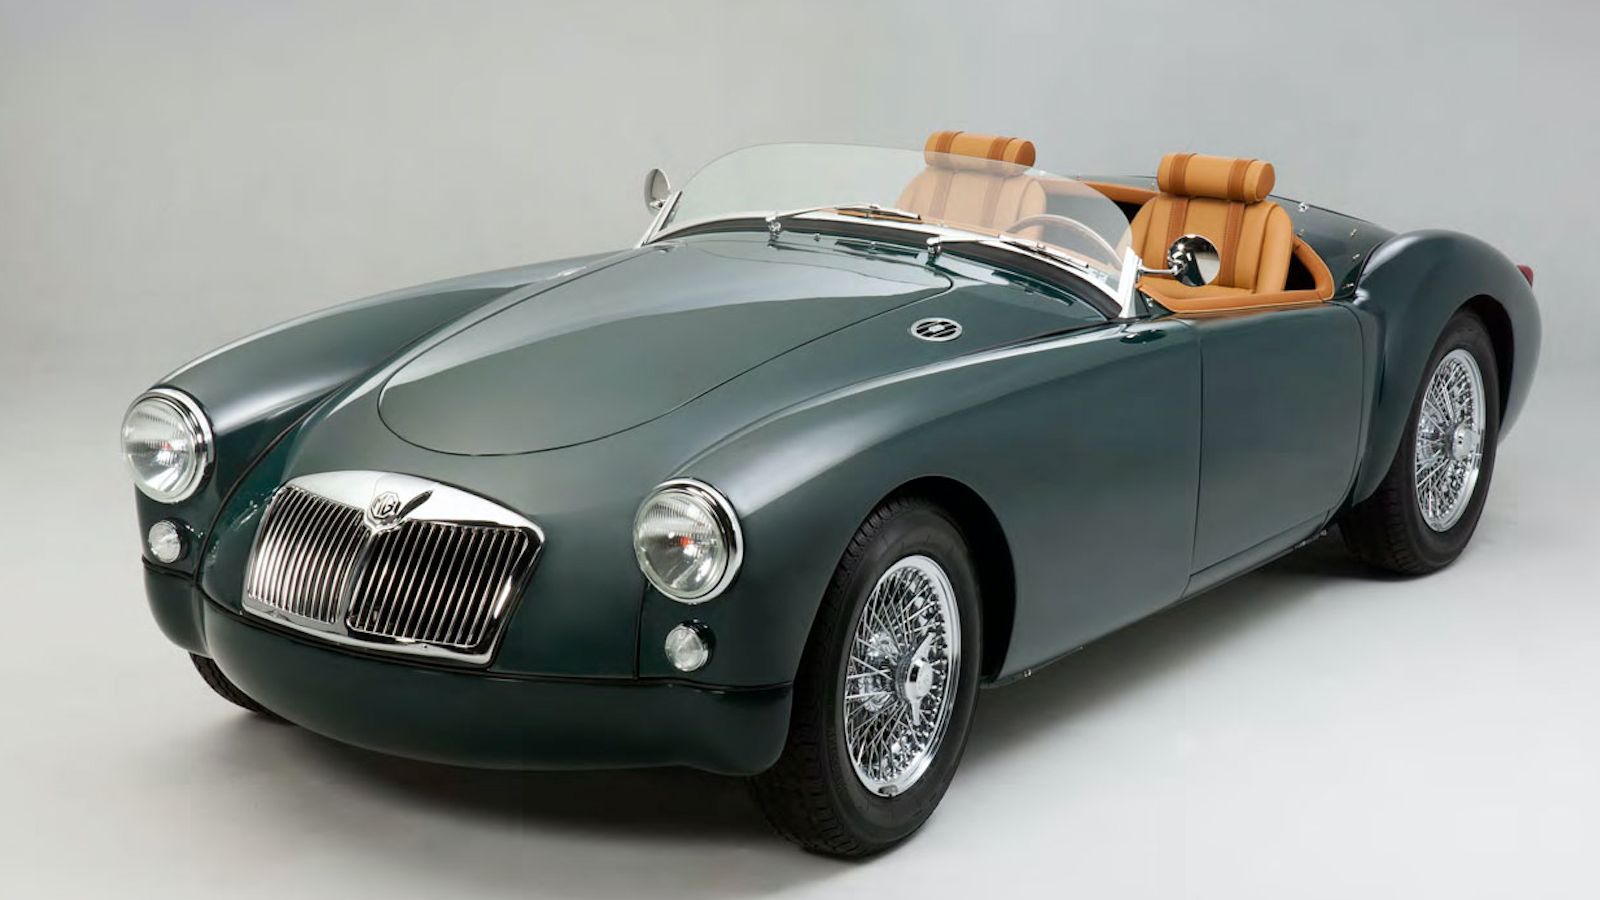 The best vintage and classic cars for sale online